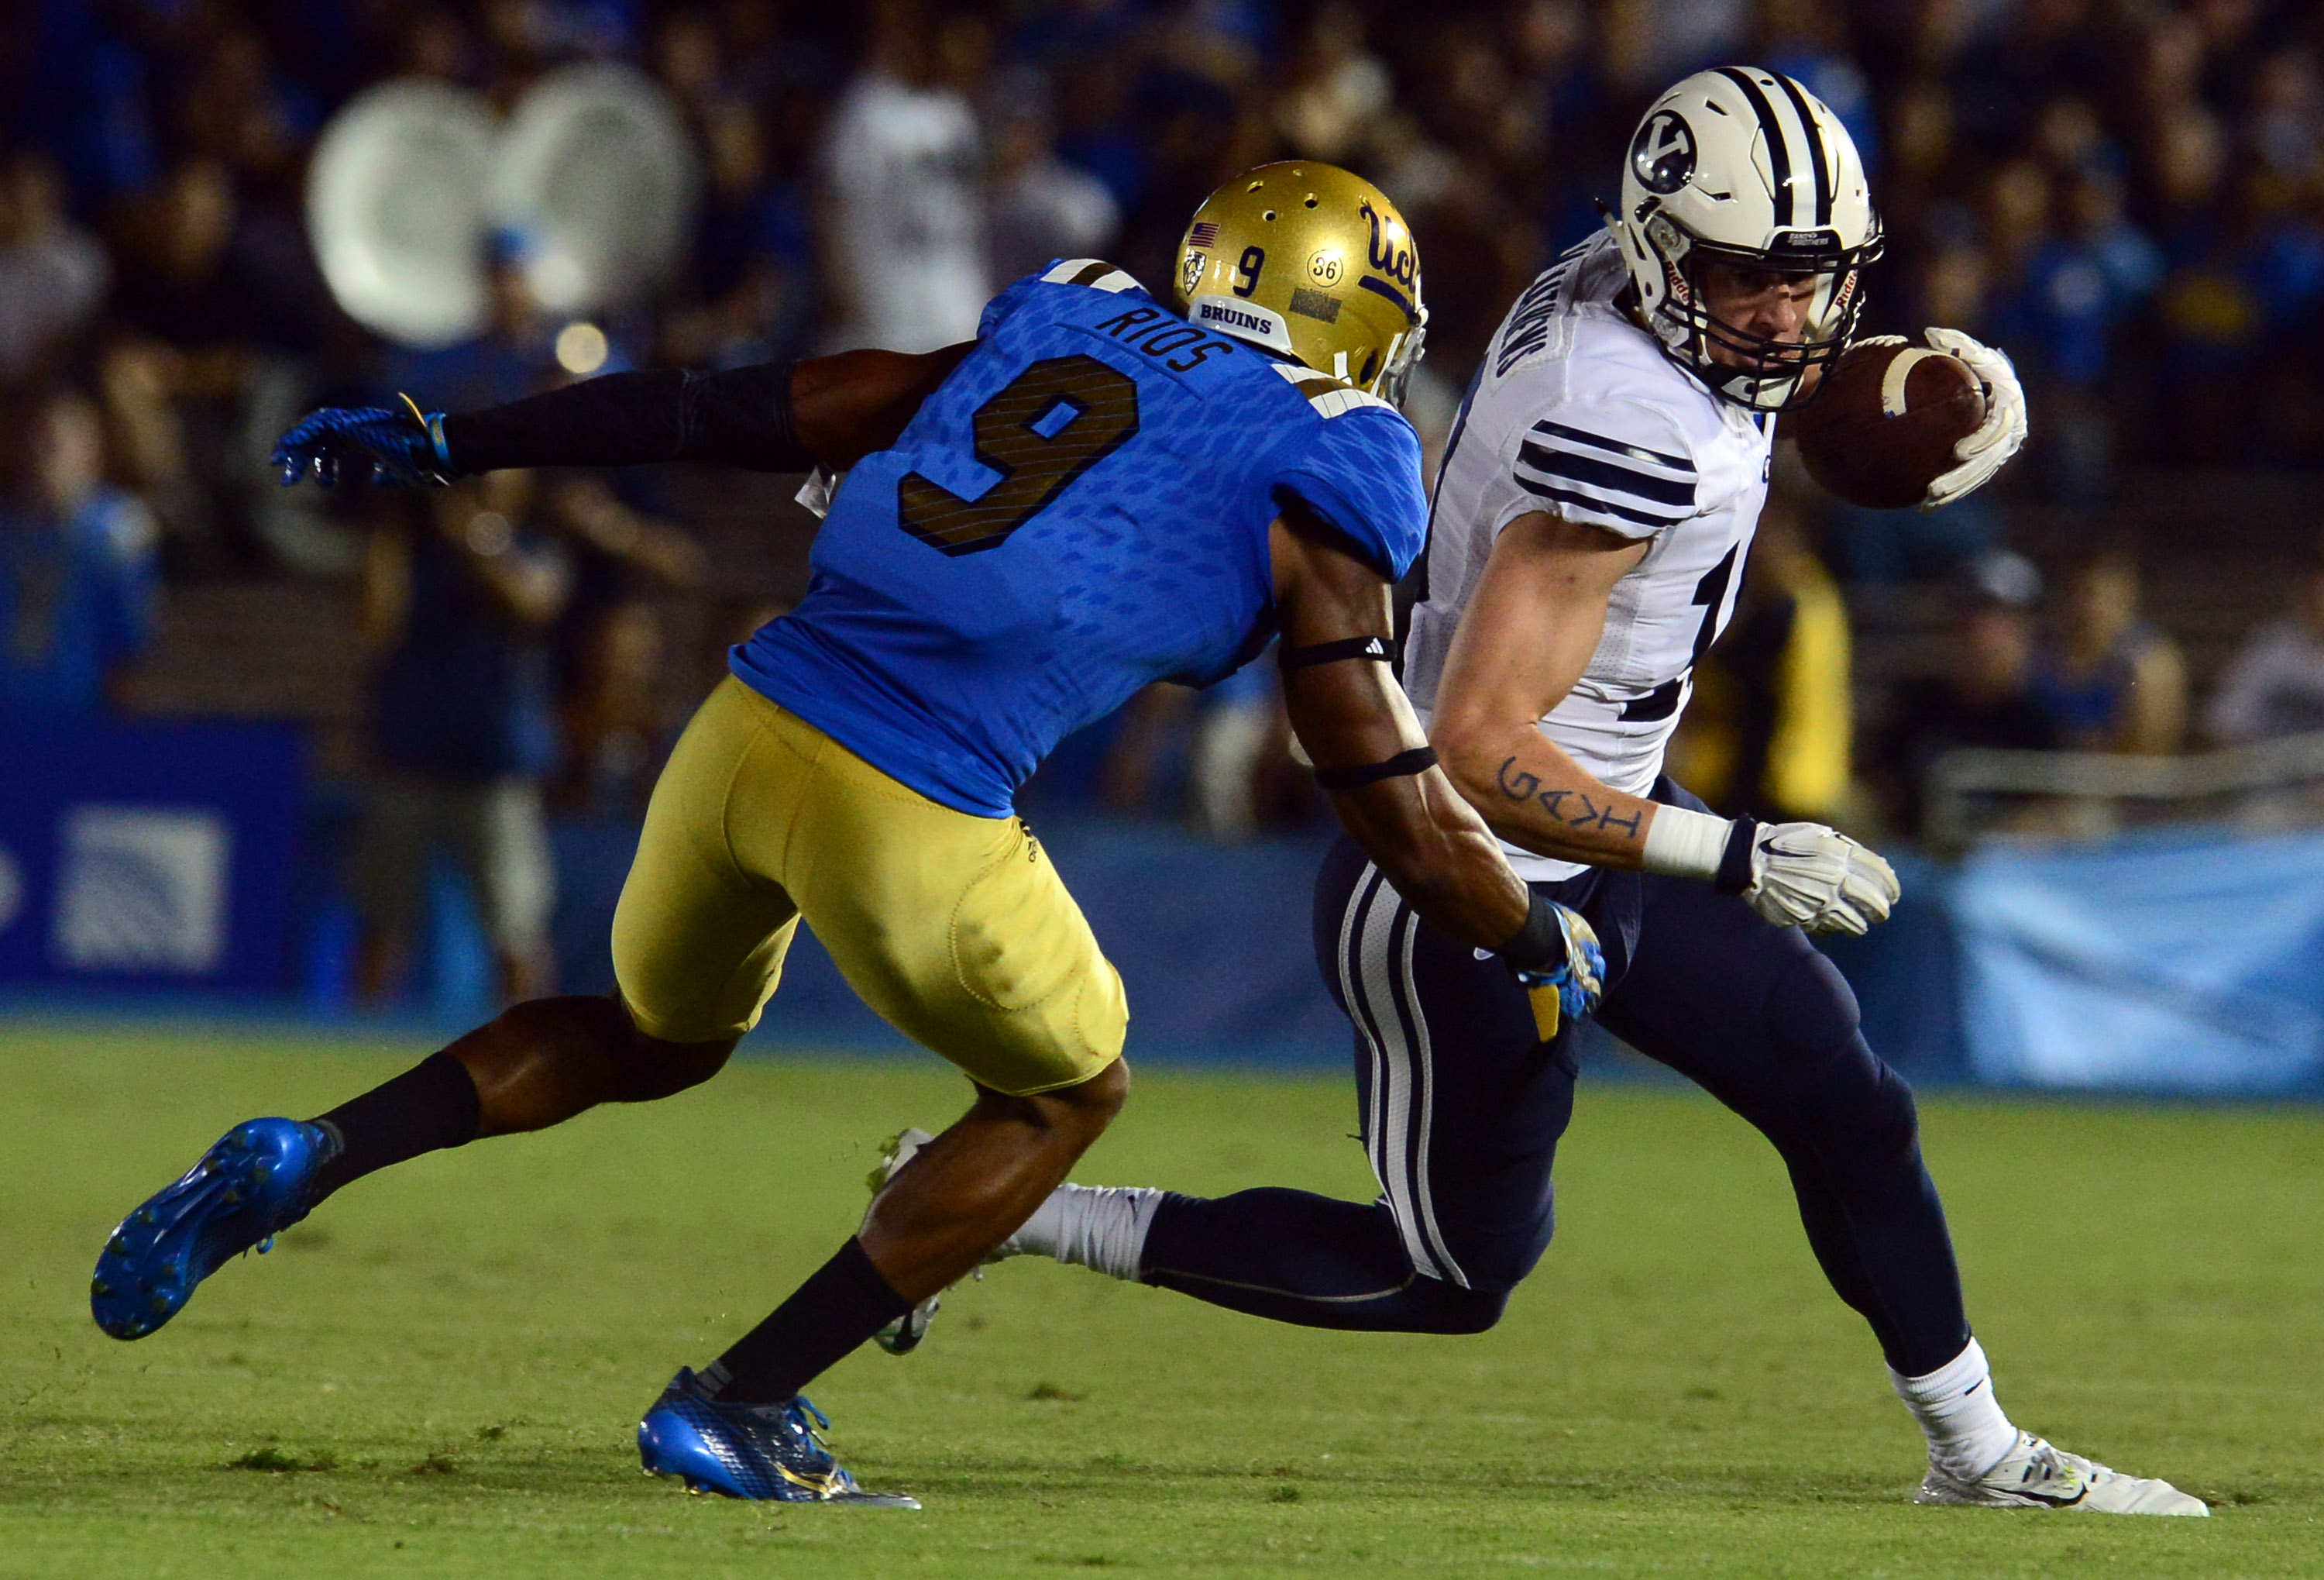 Brigham Young wide receiver Mitch Mathews (10) catches a pass for yardage past UCLA defensive back Marcus Rios (9) in the first half of a NCAA college football game at the Rose Bowl in Pasadena, Calif., Saturday, Sept.19, 2015. (Photo by Keith Birmingham/ Pasadena Star-News)